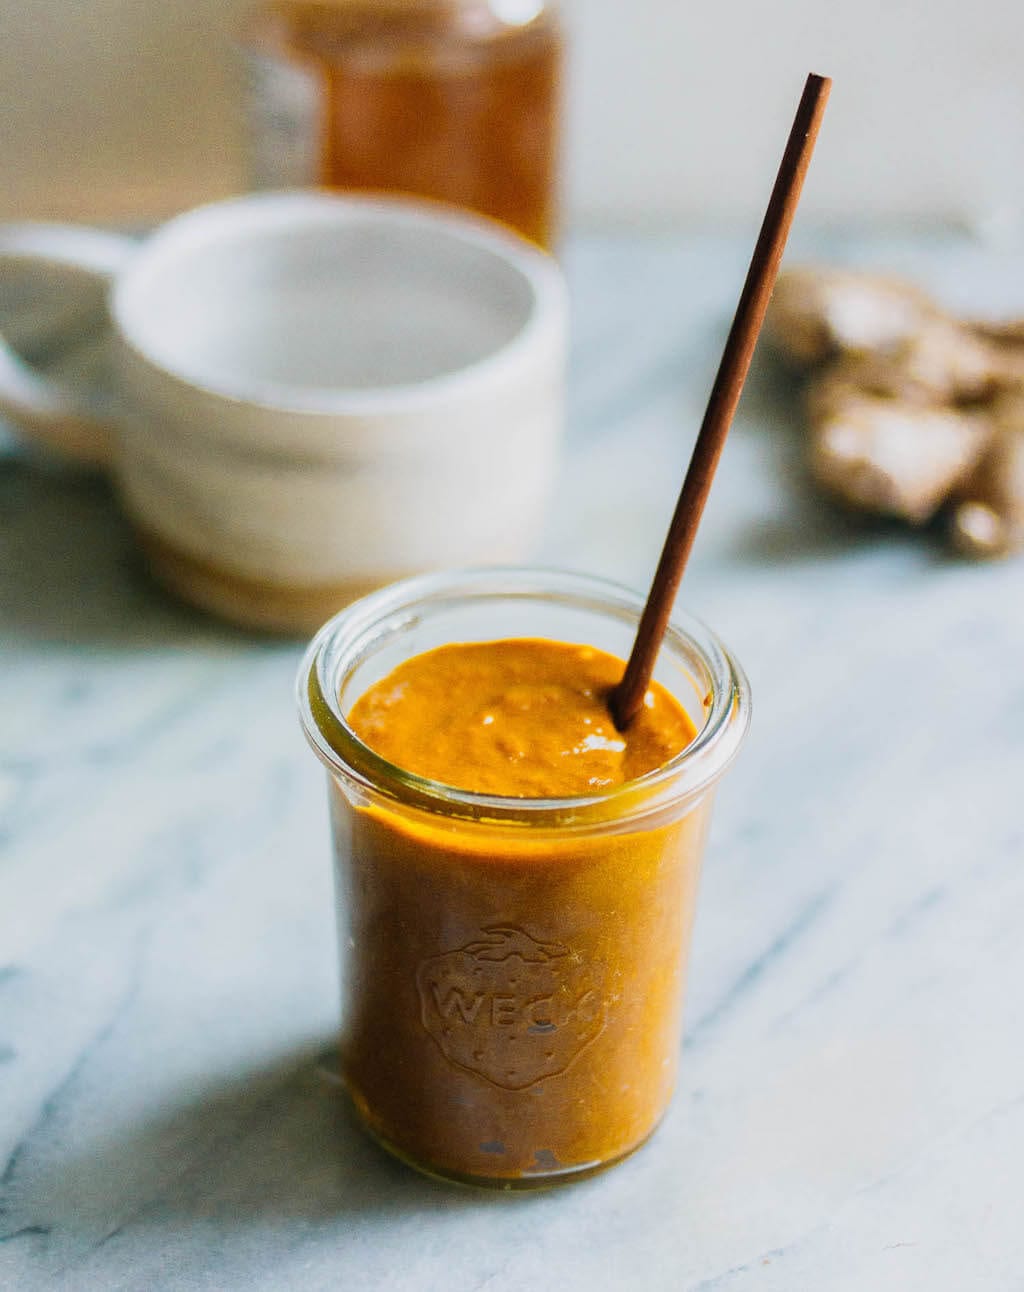 Honey paste is a combination of honey with medicinal ingredients to treat a variety of ailments. ‘ This honey paste is specially formulated to combat pain. It starts with raw honey, combined with white willow bark and a blend of anti-inflammatory fresh ginger, turmeric, and apple cider vinegar.